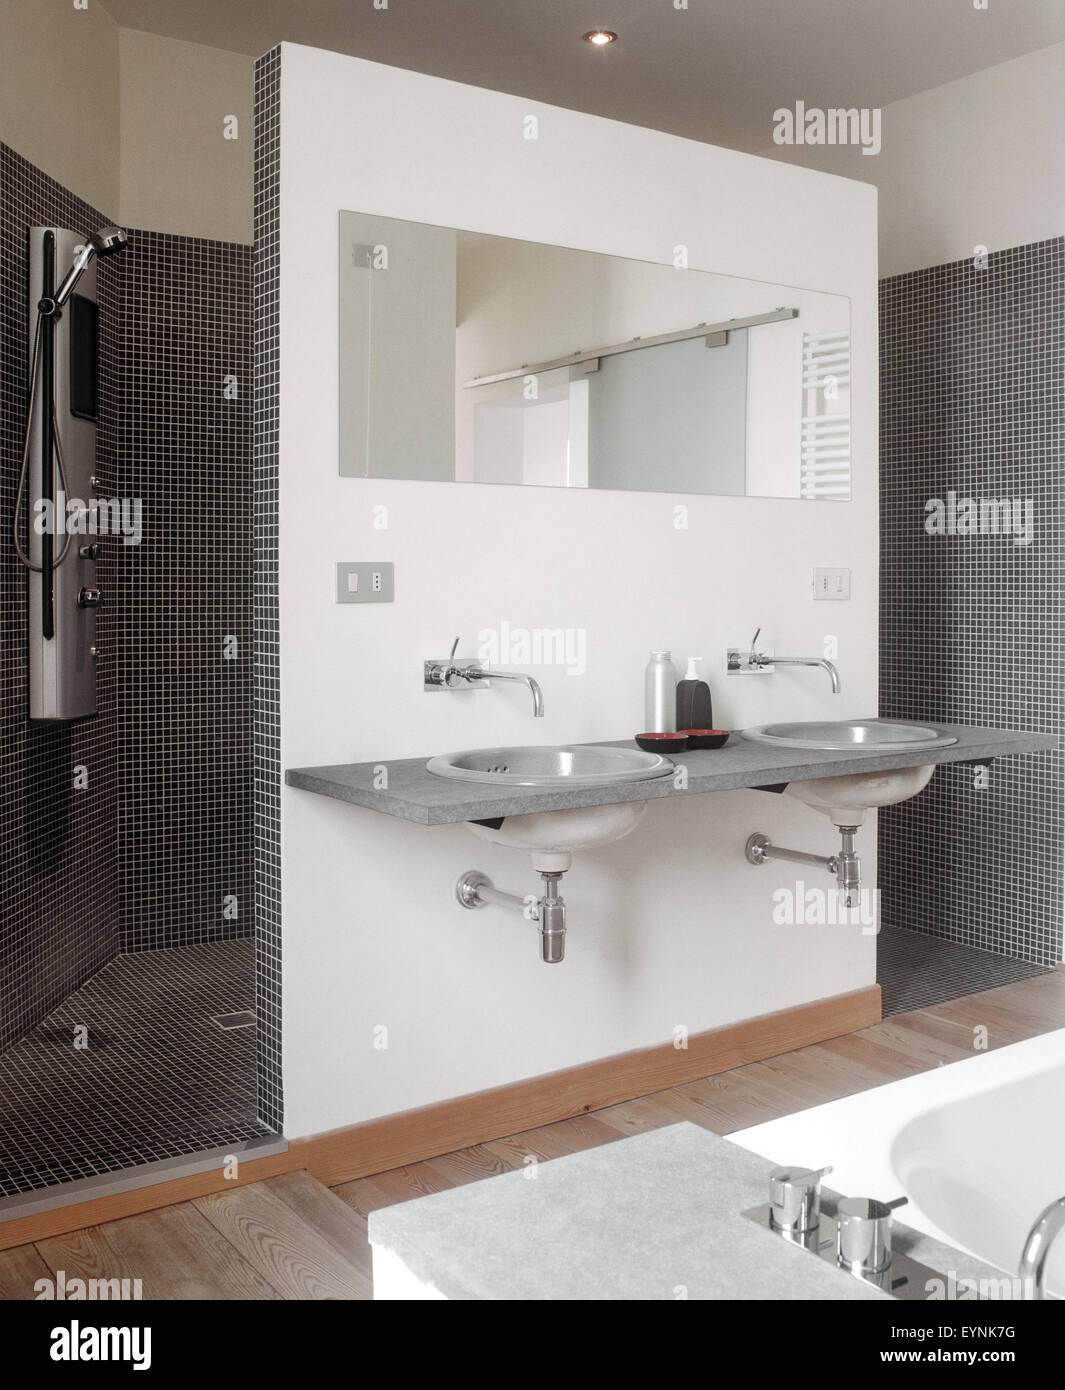 interior view of a modern bathroom in foreground the Vanity basin and mirror overlooking on shower cubicle Stock Photo